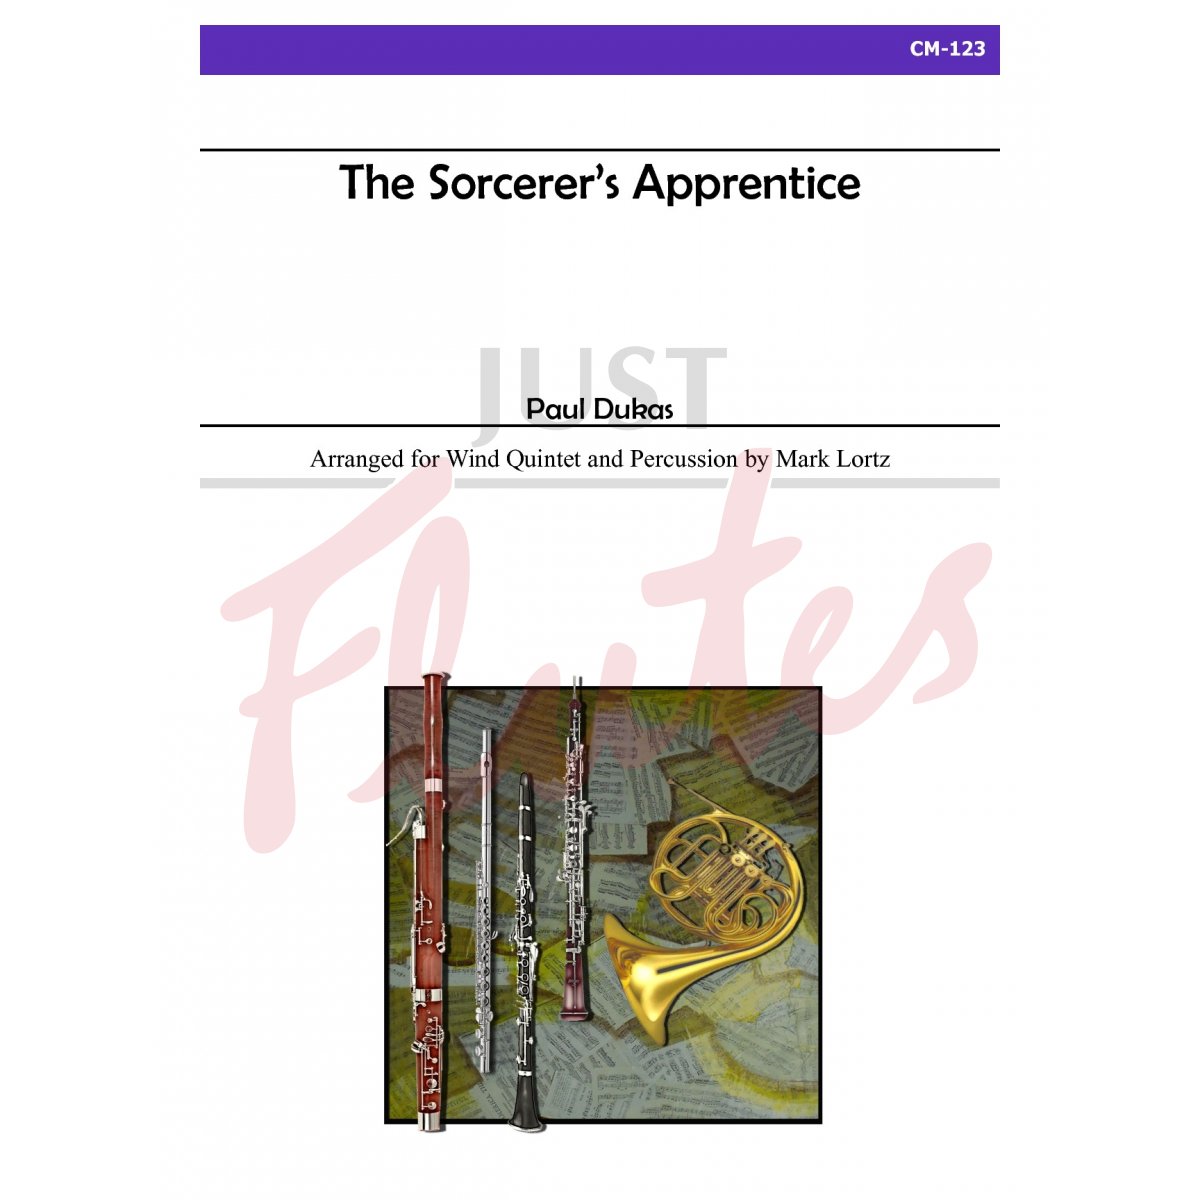 The Sorcerer's Apprentice [Wind Quintet and Percussion]